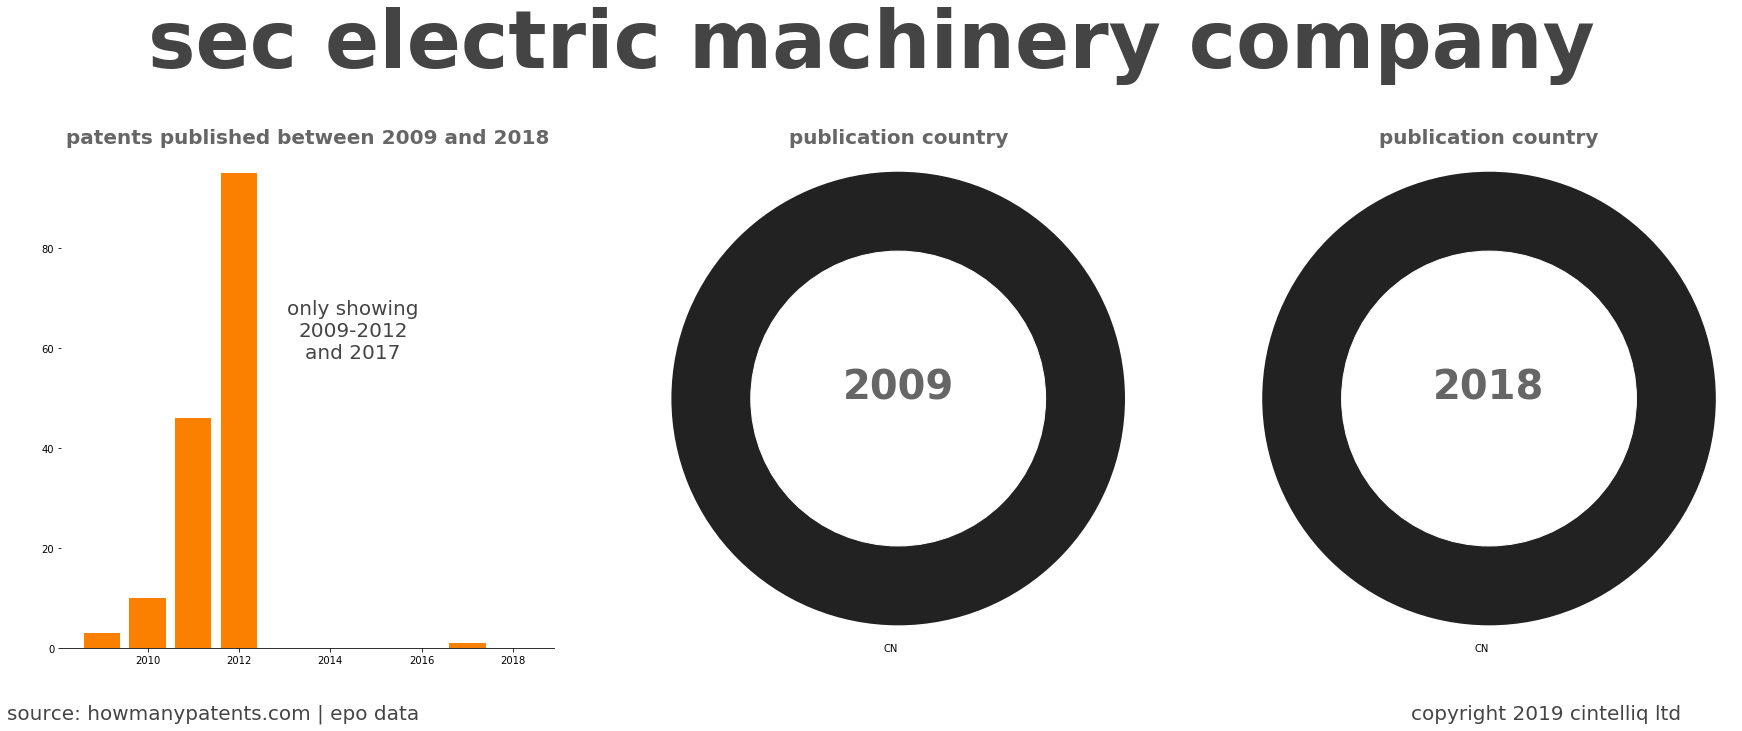 summary of patents for Sec Electric Machinery Company